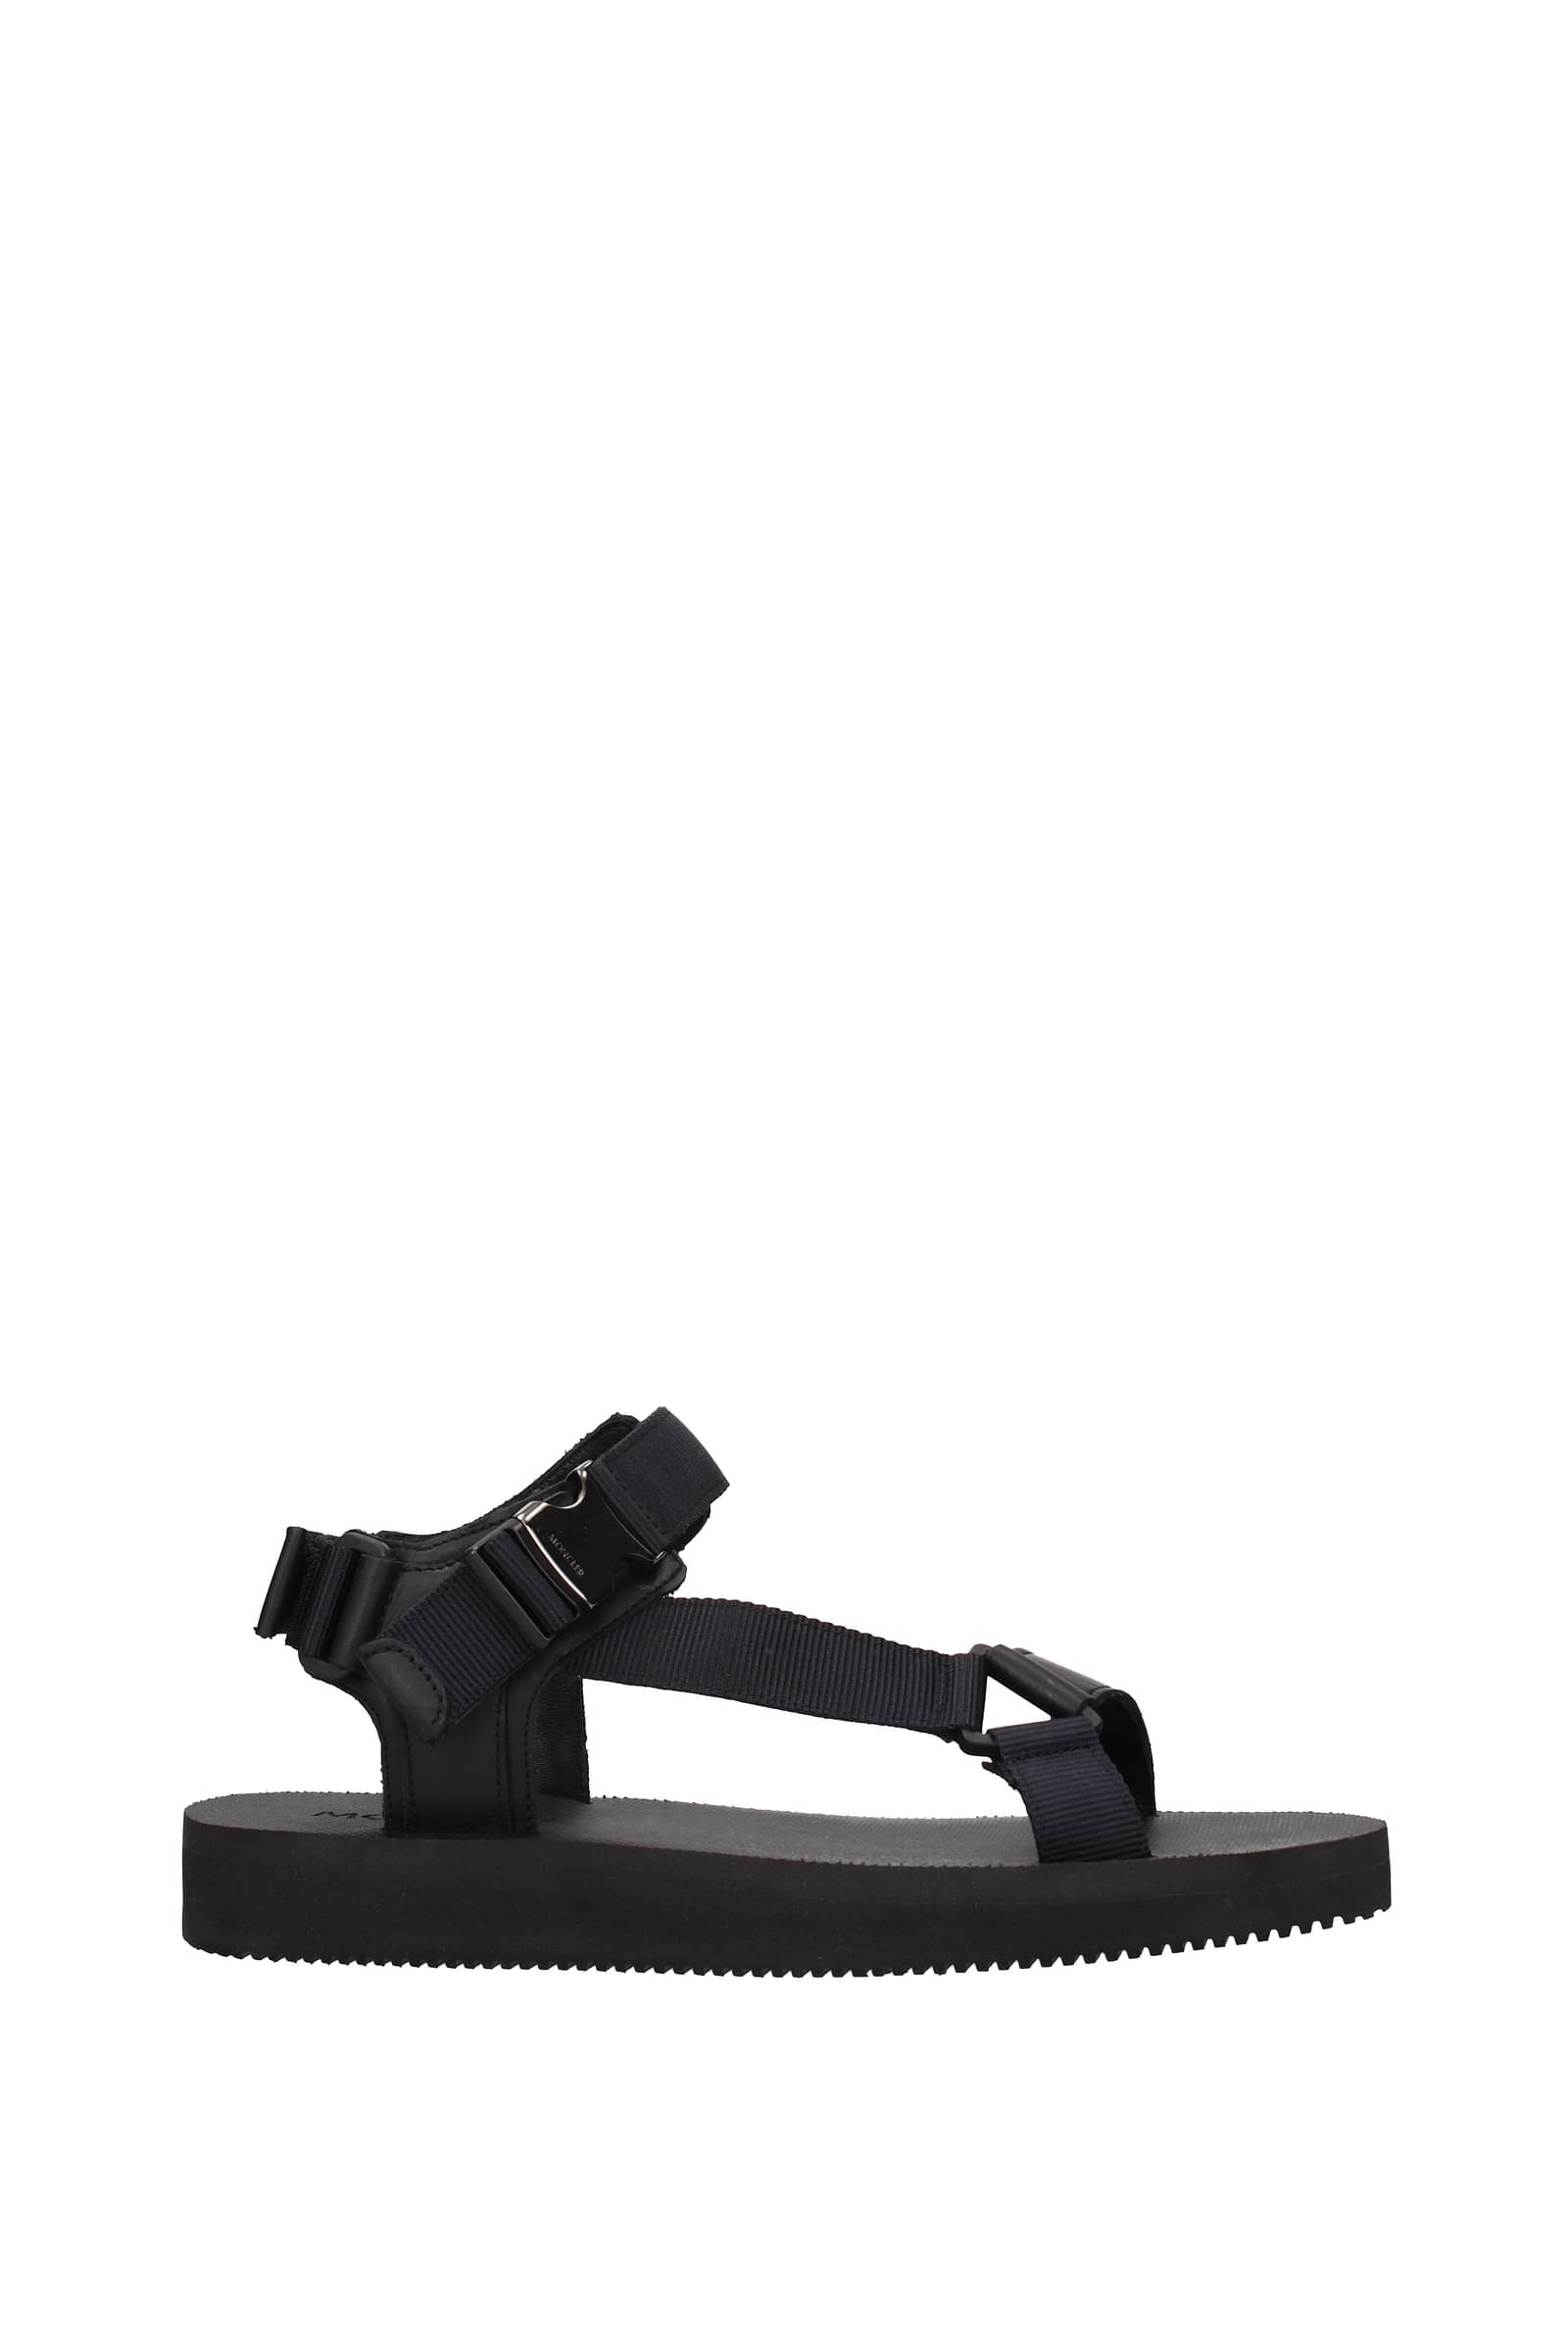 Moncler Sandals Flavia Fabric In Black | ModeSens